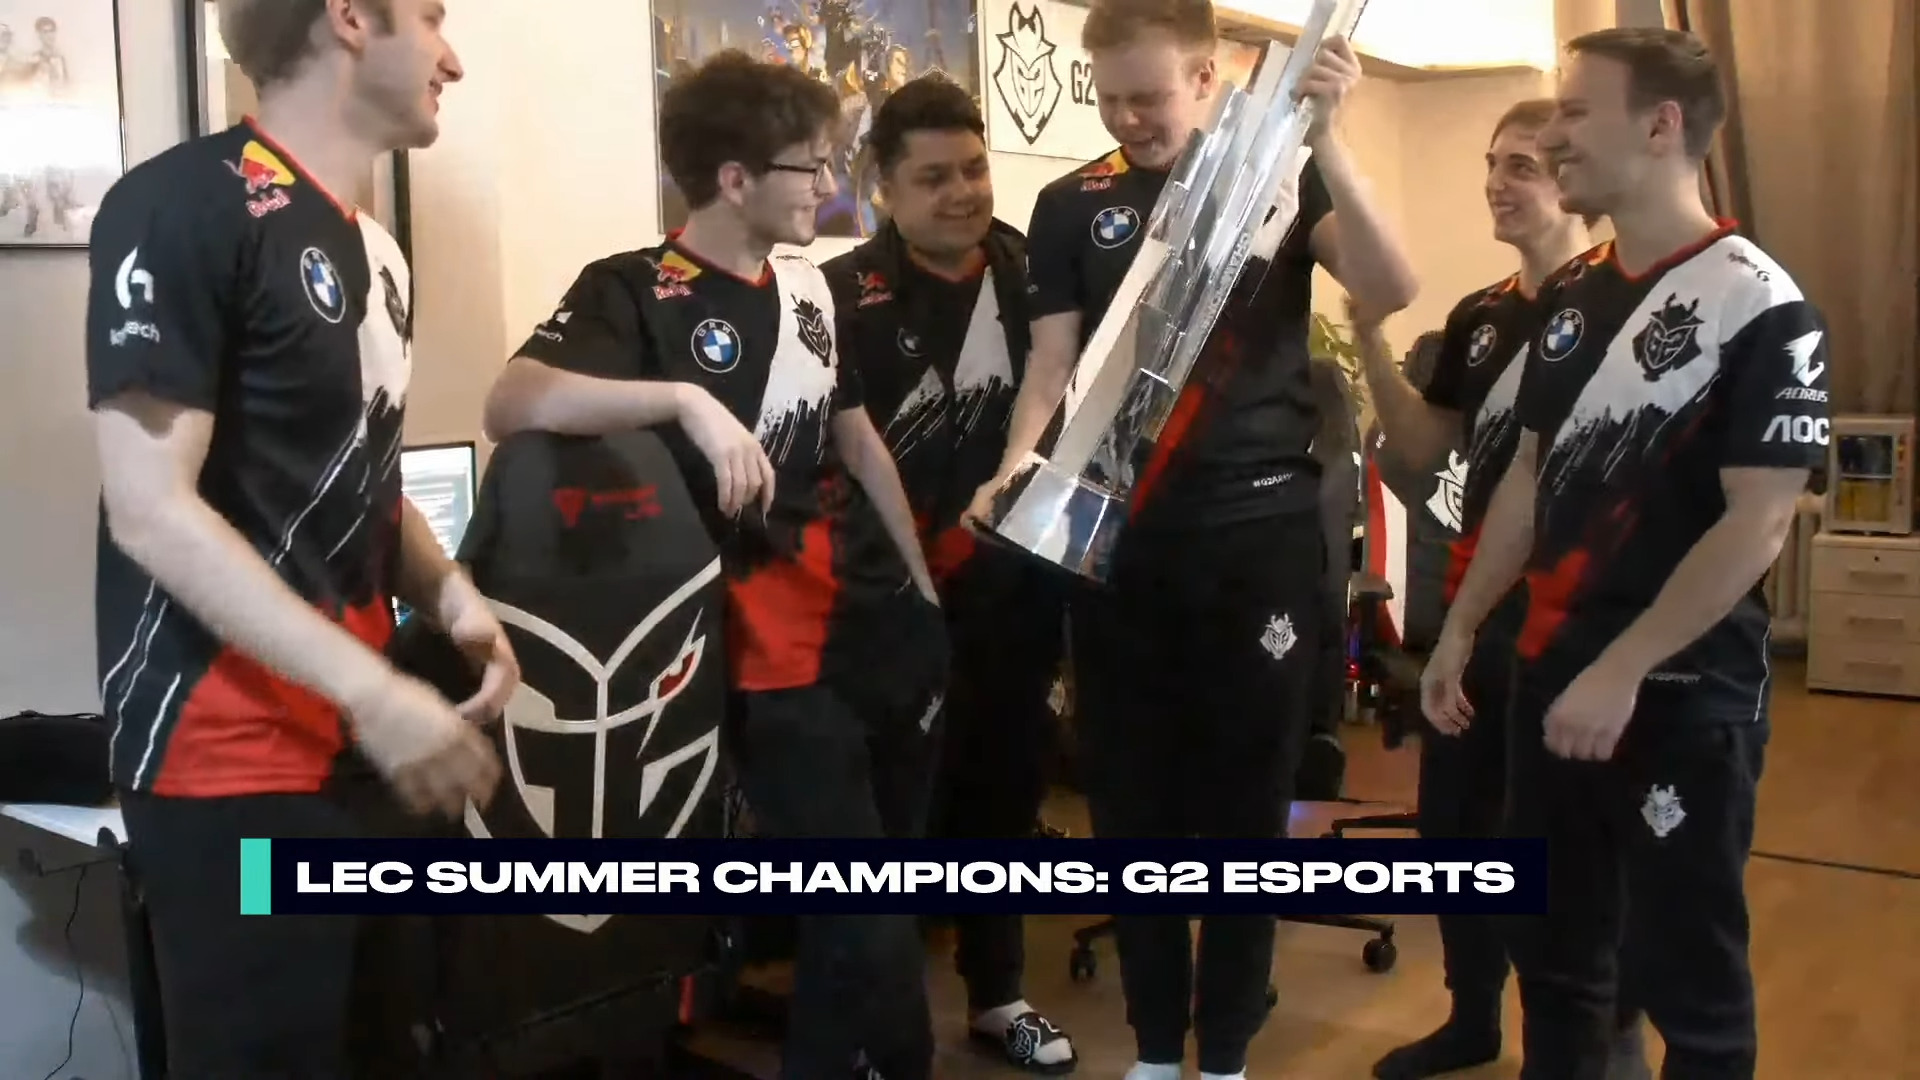 LEC – G2 Claims Eighth Title After A Clean Sweep Against Fnatic In The 2020 Summer Split